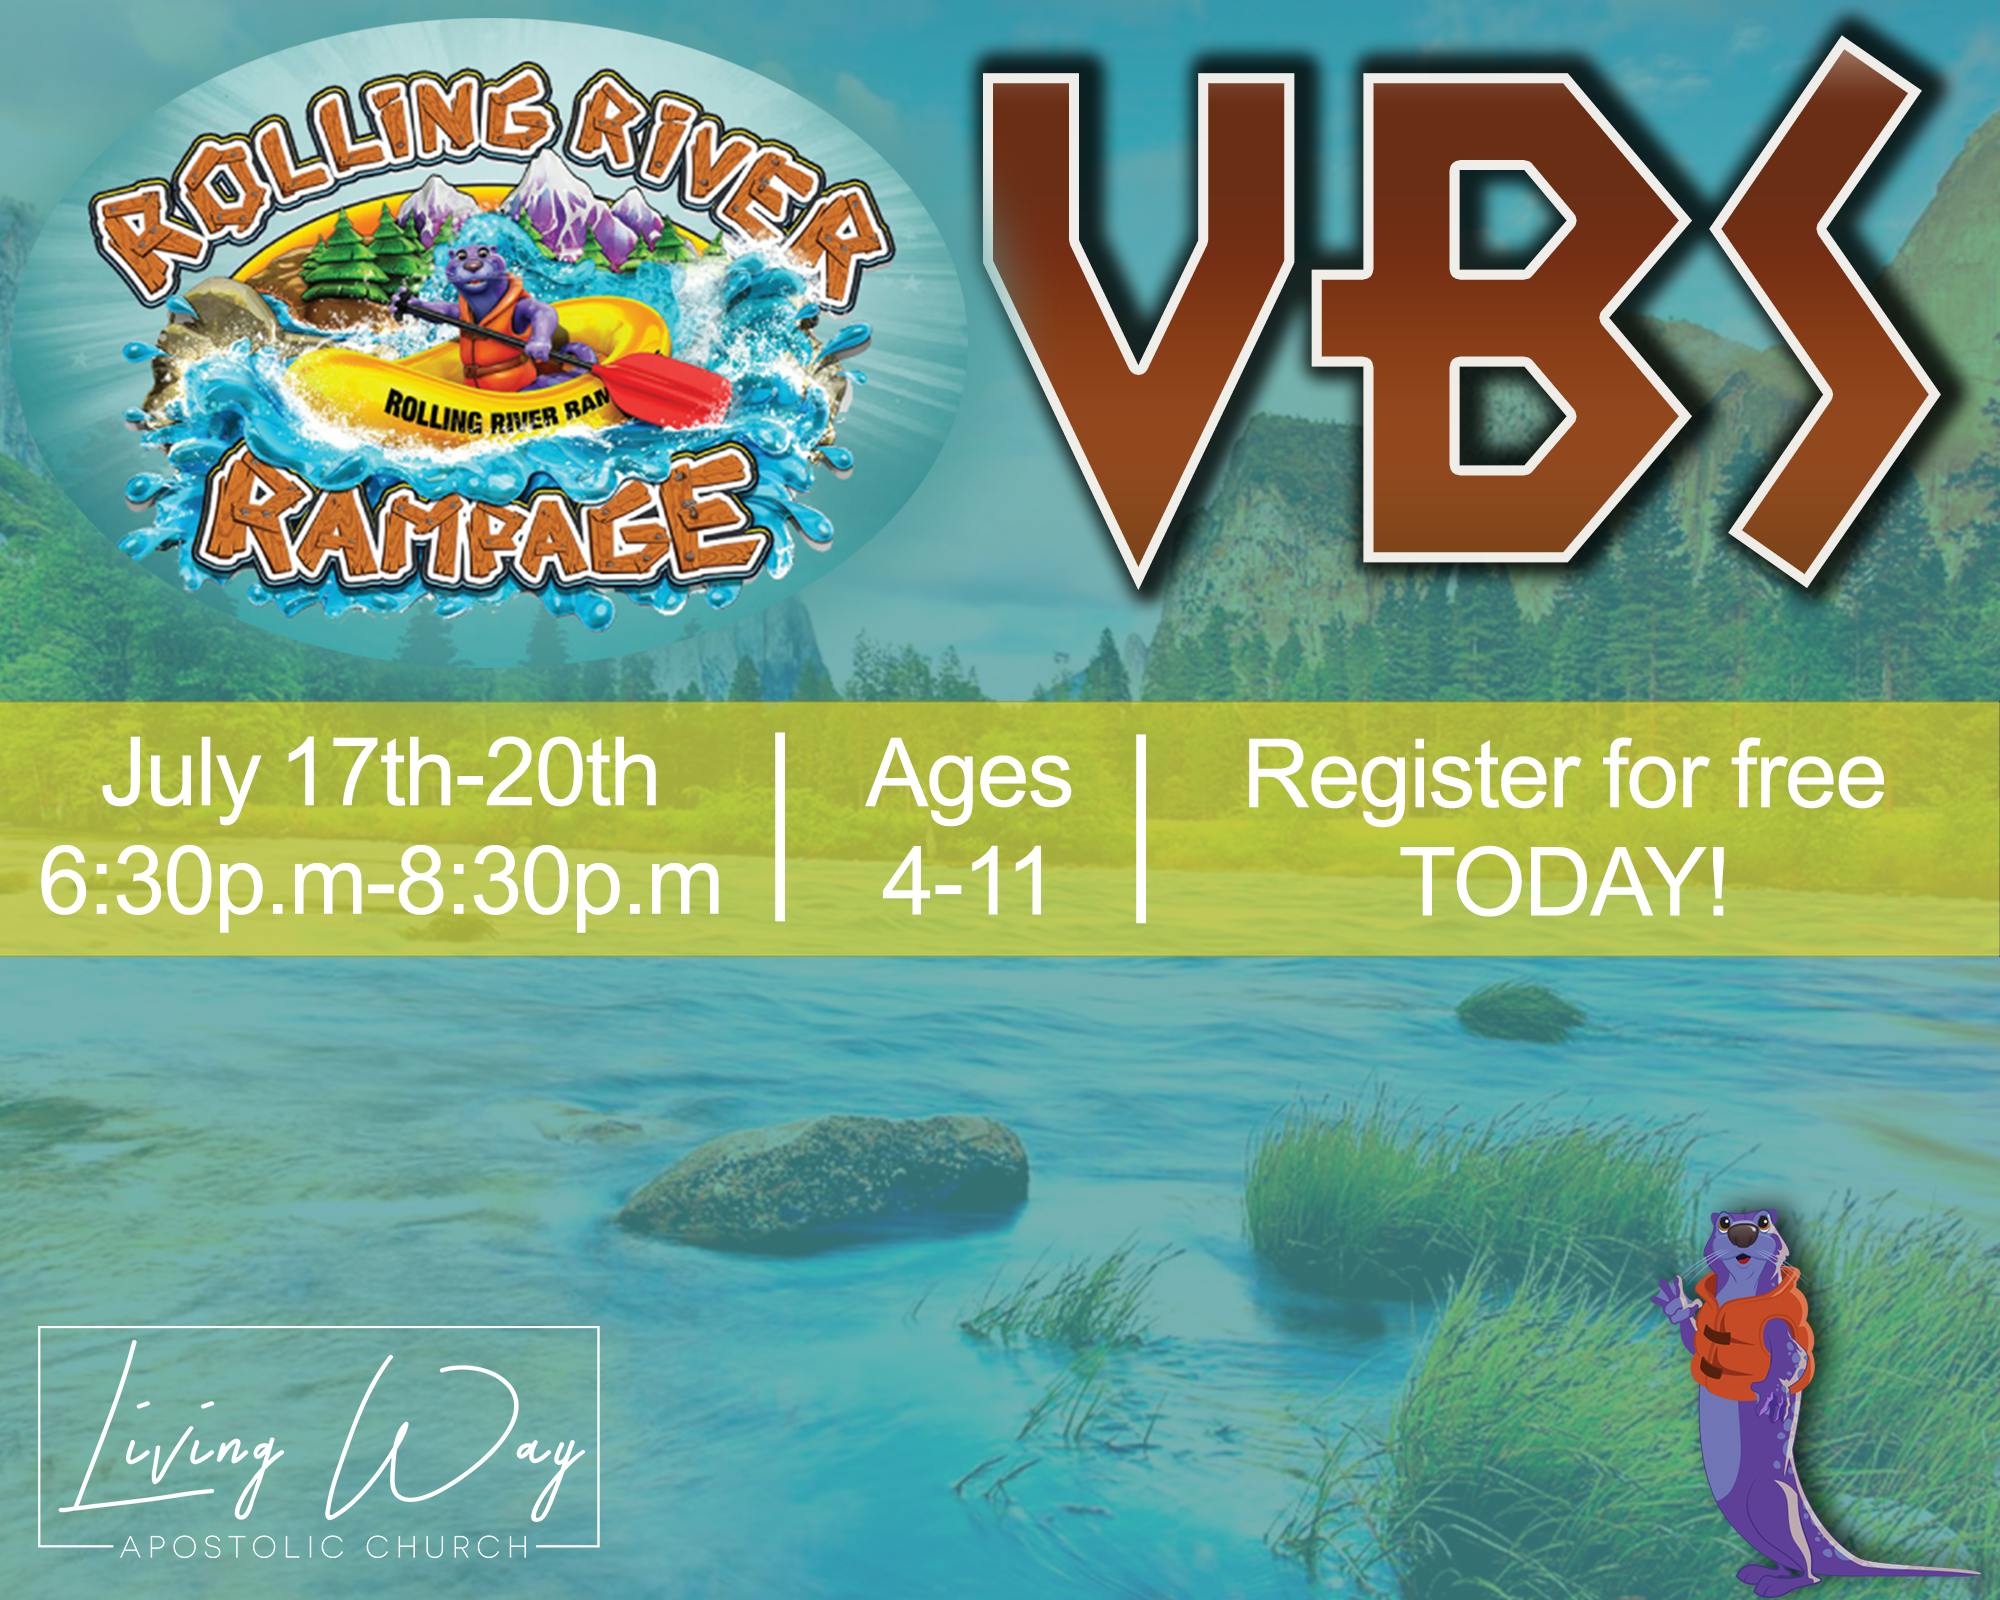 VBS 2018: ROLLING RIVER RAMPAGE